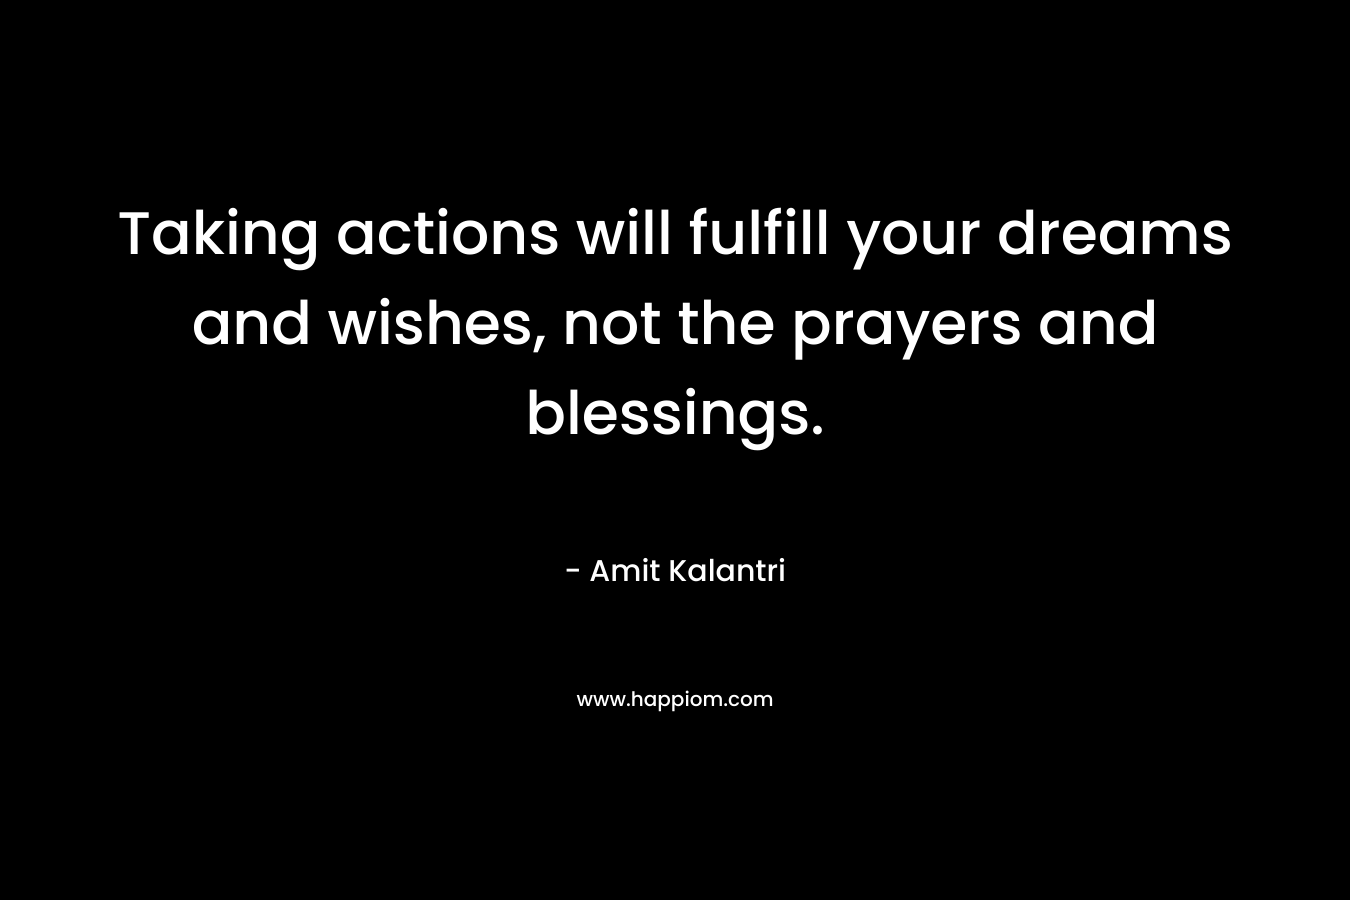 Taking actions will fulfill your dreams and wishes, not the prayers and blessings.